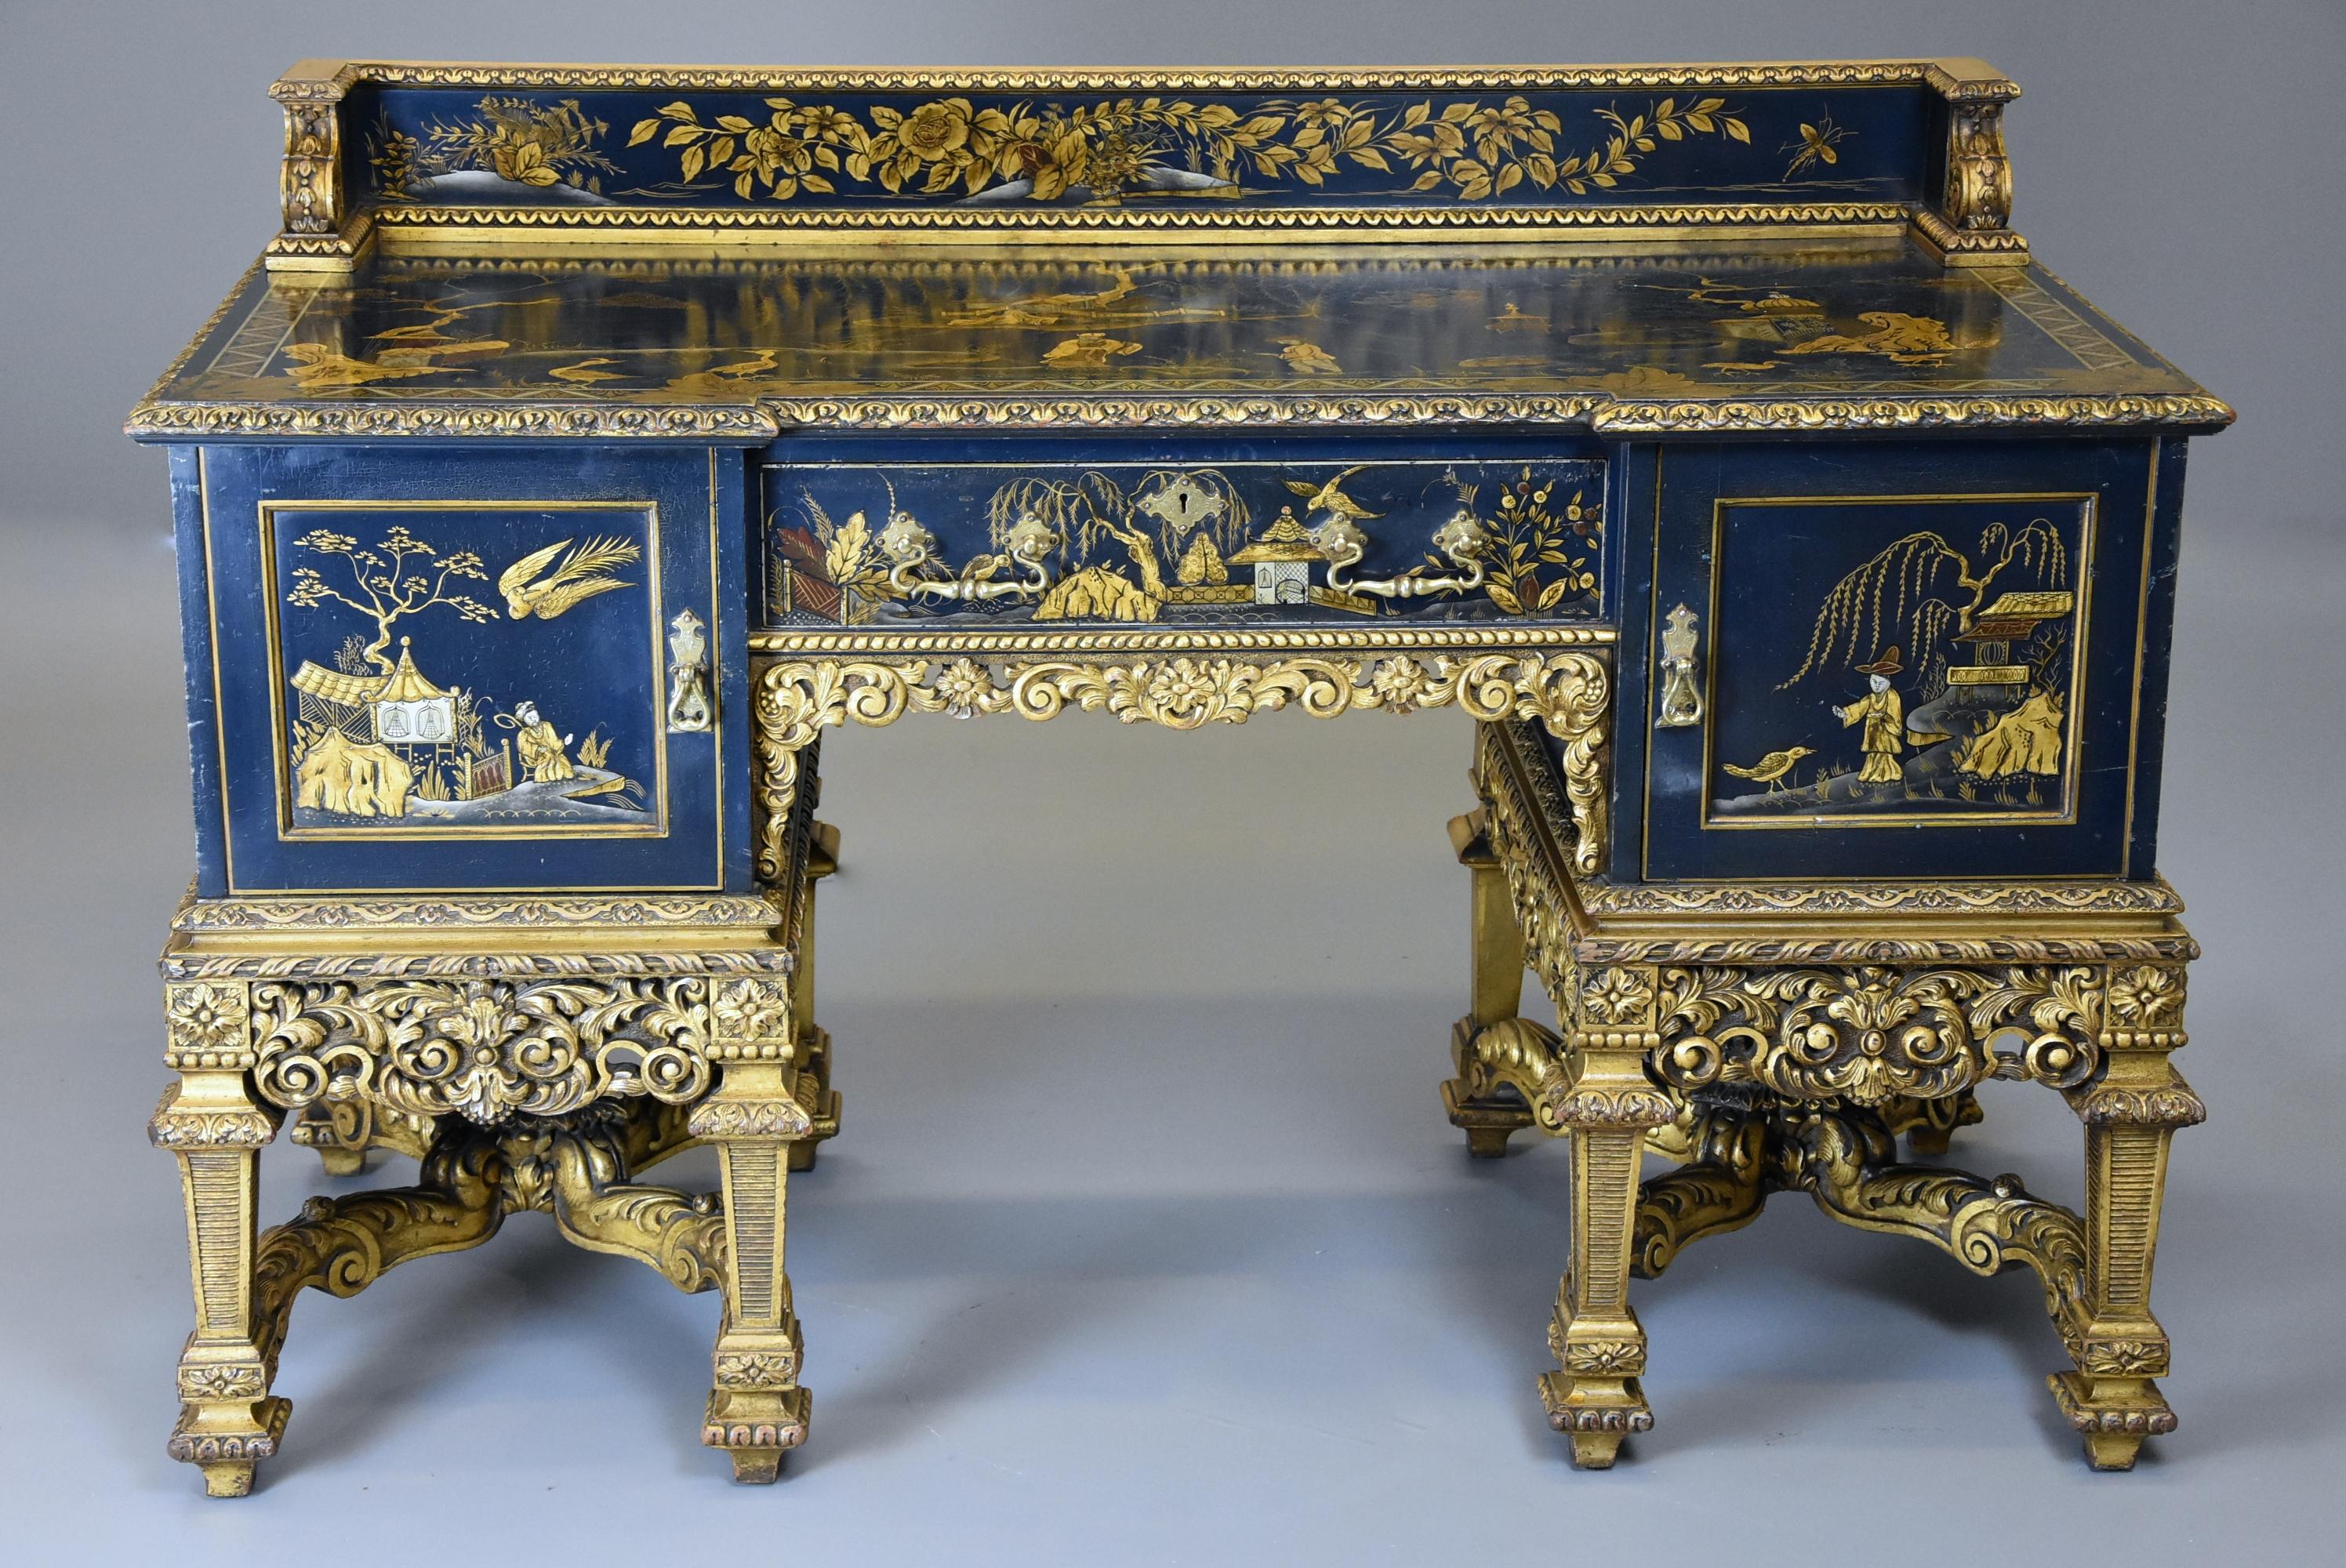 A superb quality highly decorative early 20th century Charles II style chinoiserie dressing table or desk. 

This dressing or desk consists of a finely carved and lacquered upstand to the back with floral and foliate decoration with and an egg and